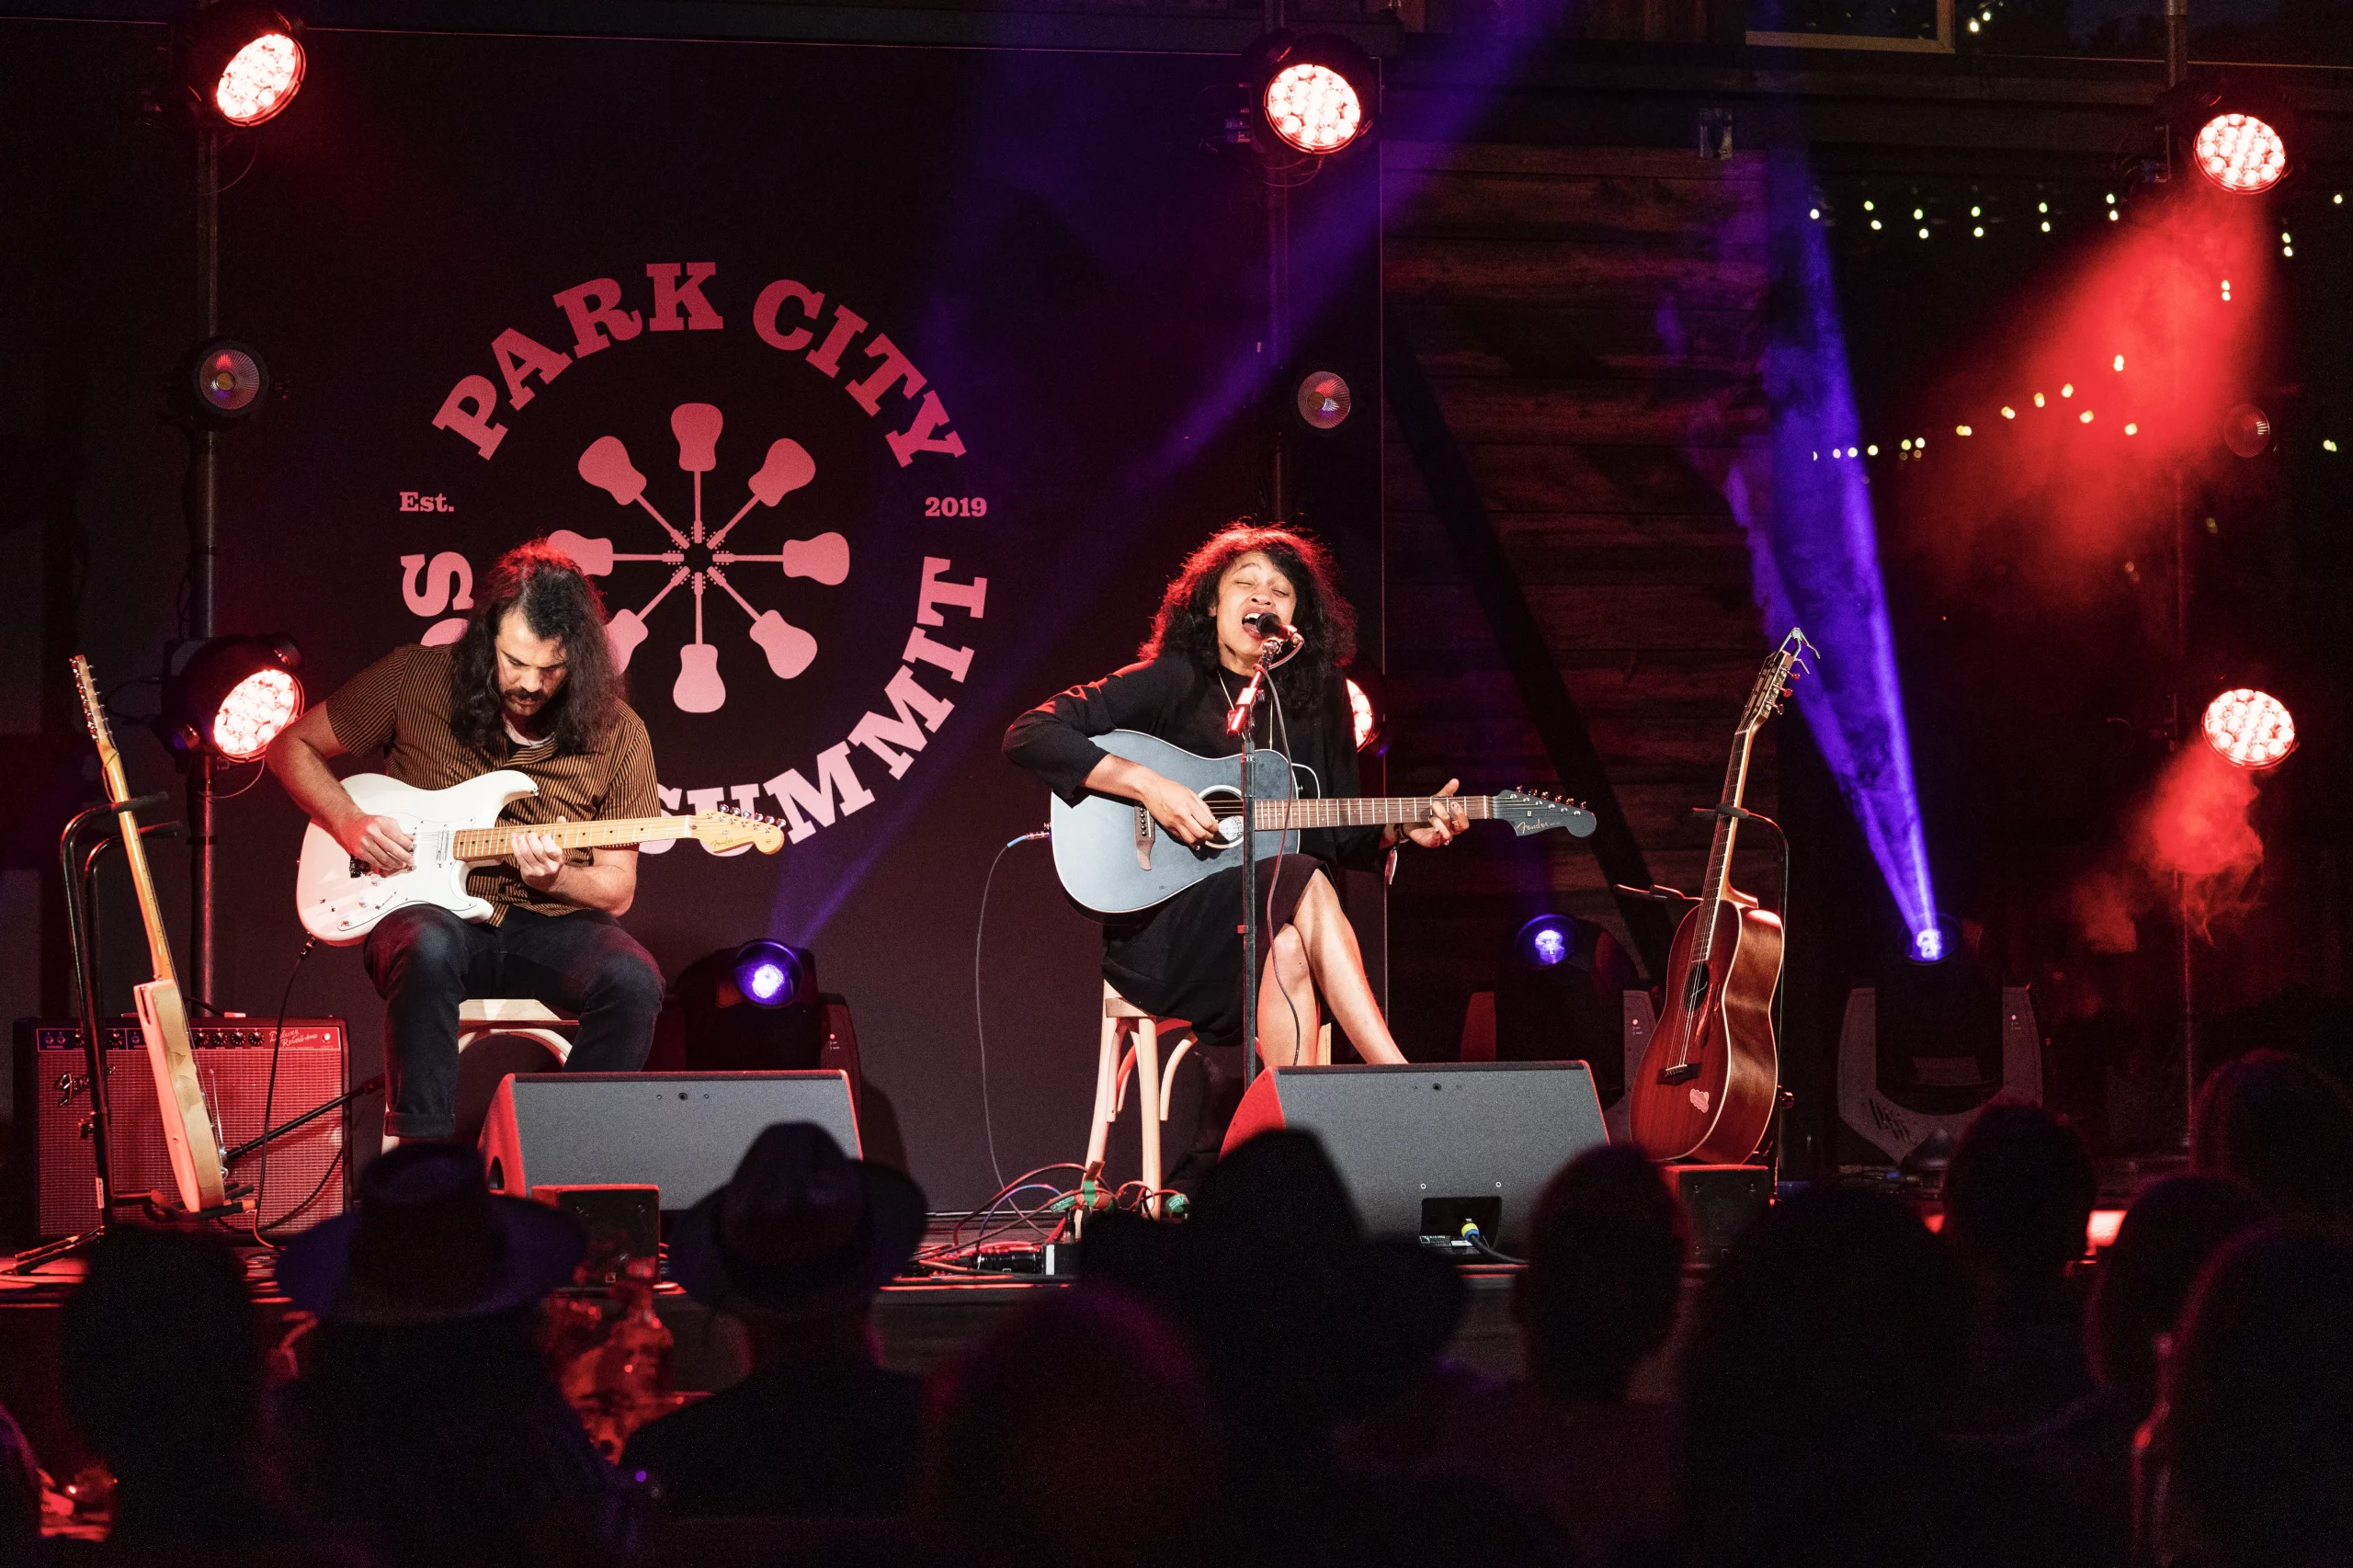 Adia Victoria performing at last year's Park City Song Summit. Photo courtesy of Erika Goldring.